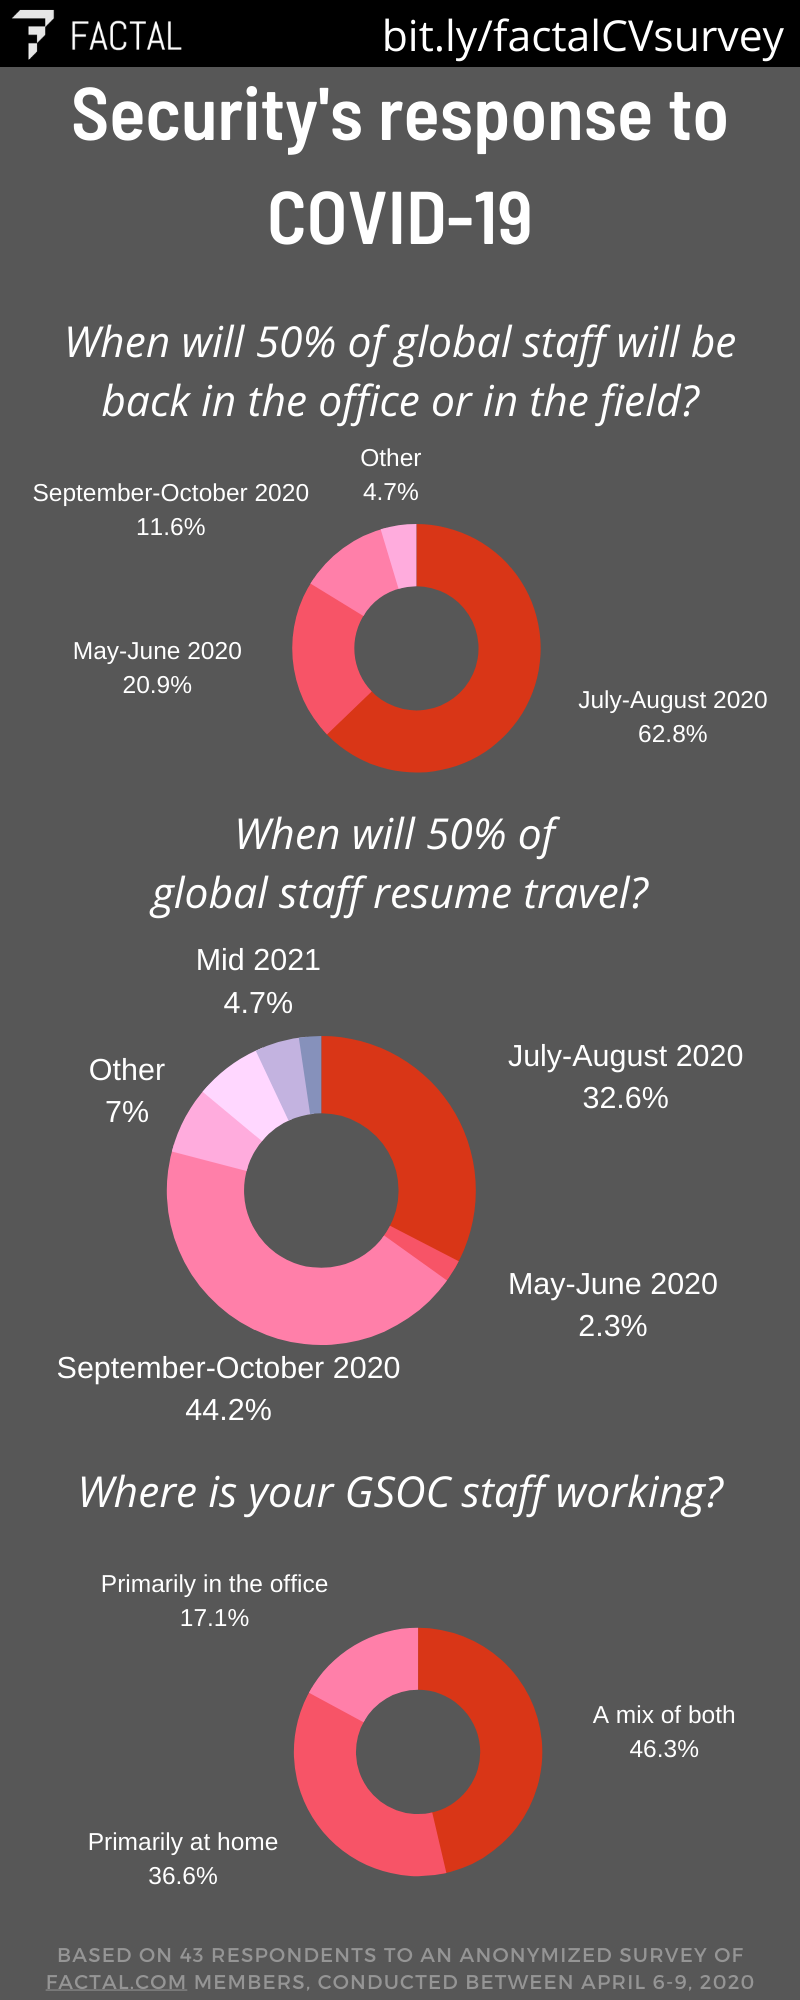 Security responses to a COVID-19 impact survey in April 2020. 62% thought that people would be back in offices in July-August with at least 11% saying longer than that. Most saw travel returning to 50% of prepandemic not until late 2020 and GSOC staff only had 17% in offices